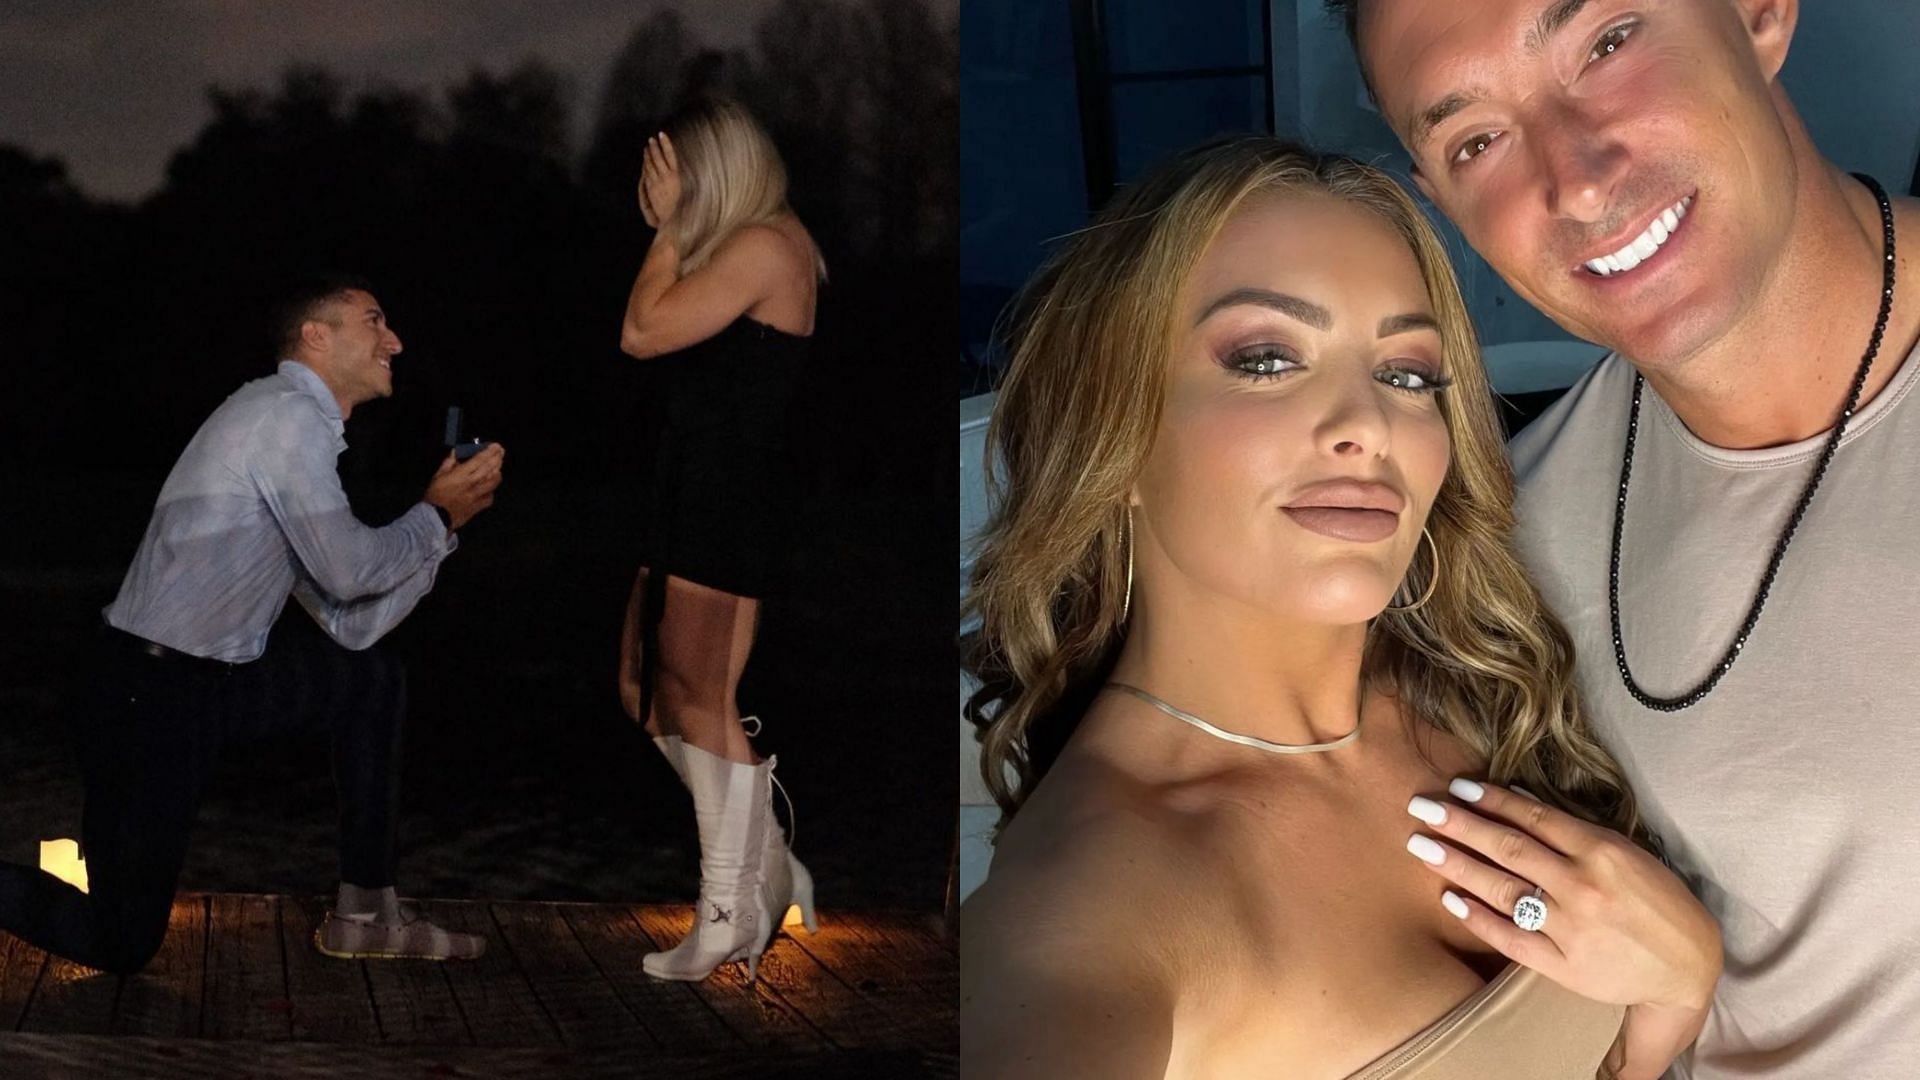 Mandy Rose with her fianc&eacute; (left) and Ivy Nile with her fianc&eacute; (right)